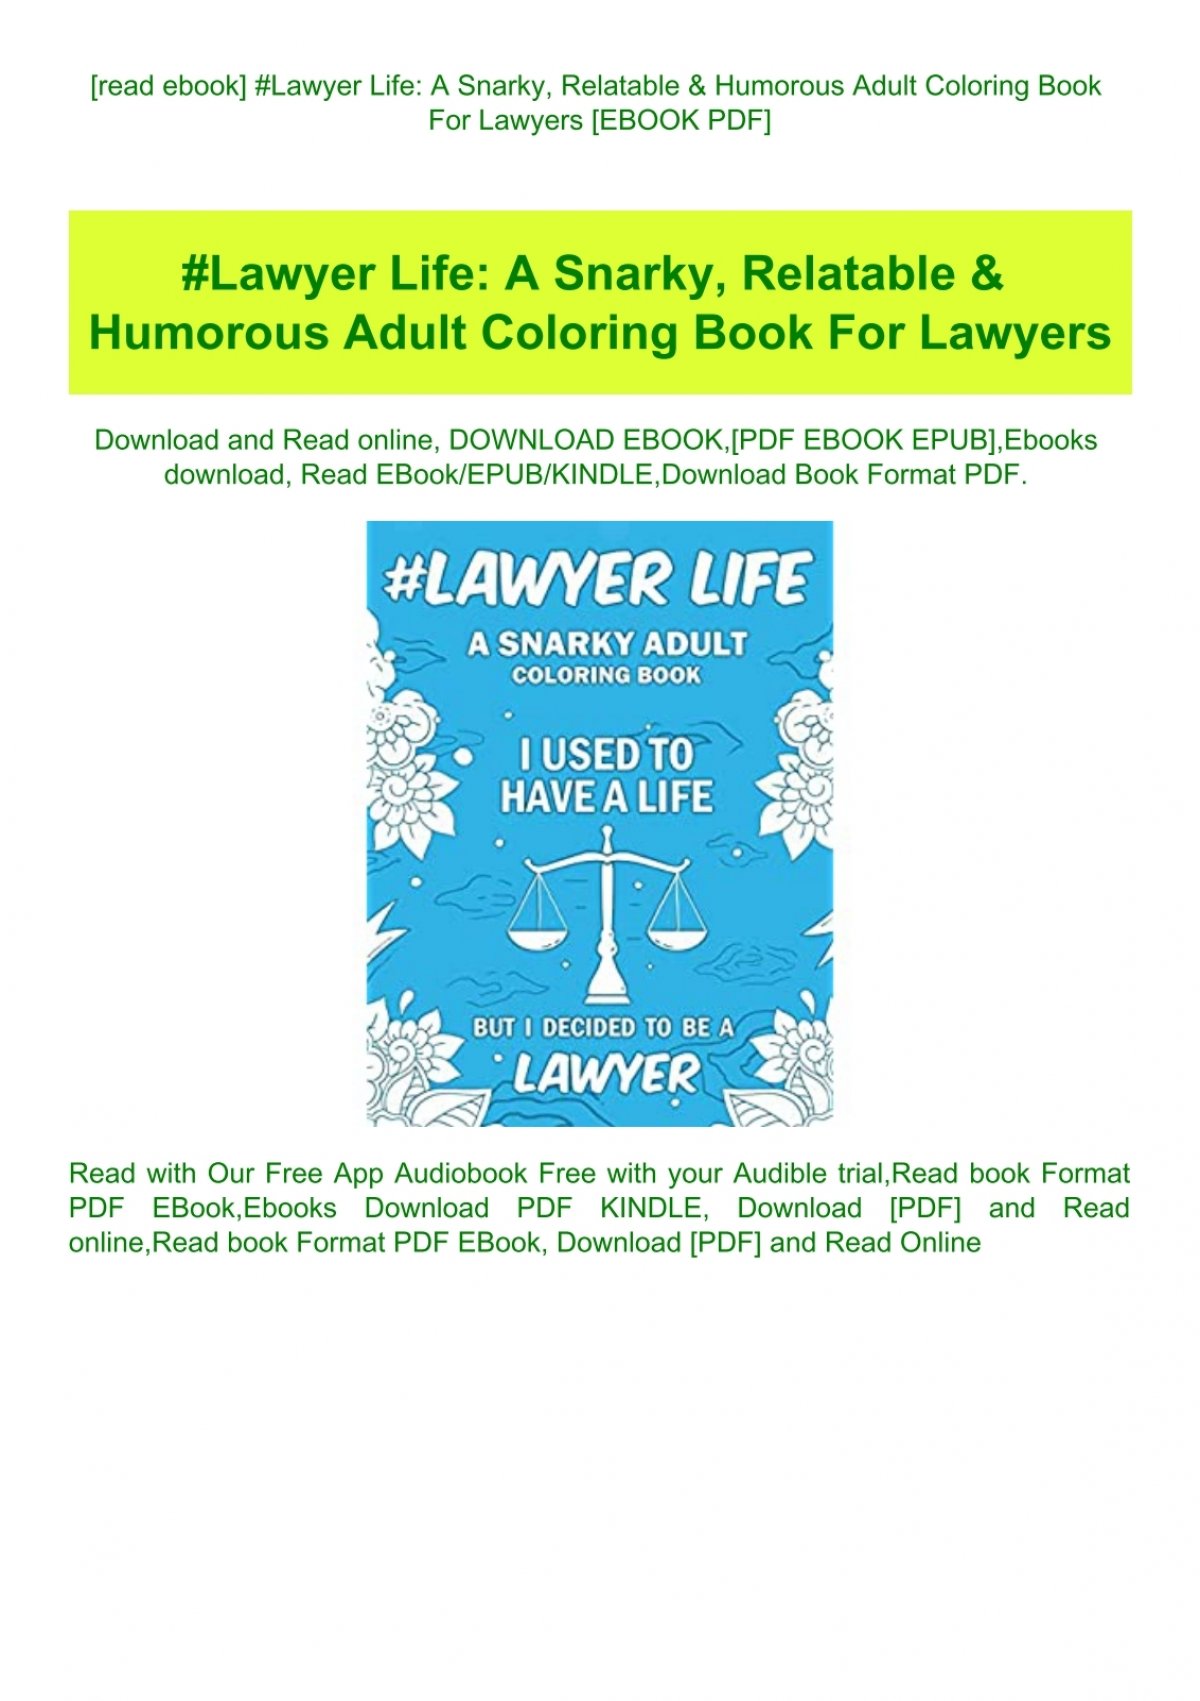 Download Read Ebook Lawyer Life A Snarky Relatable Amp Amp Humorous Adult Coloring Book For Lawyers Ebook Pdf